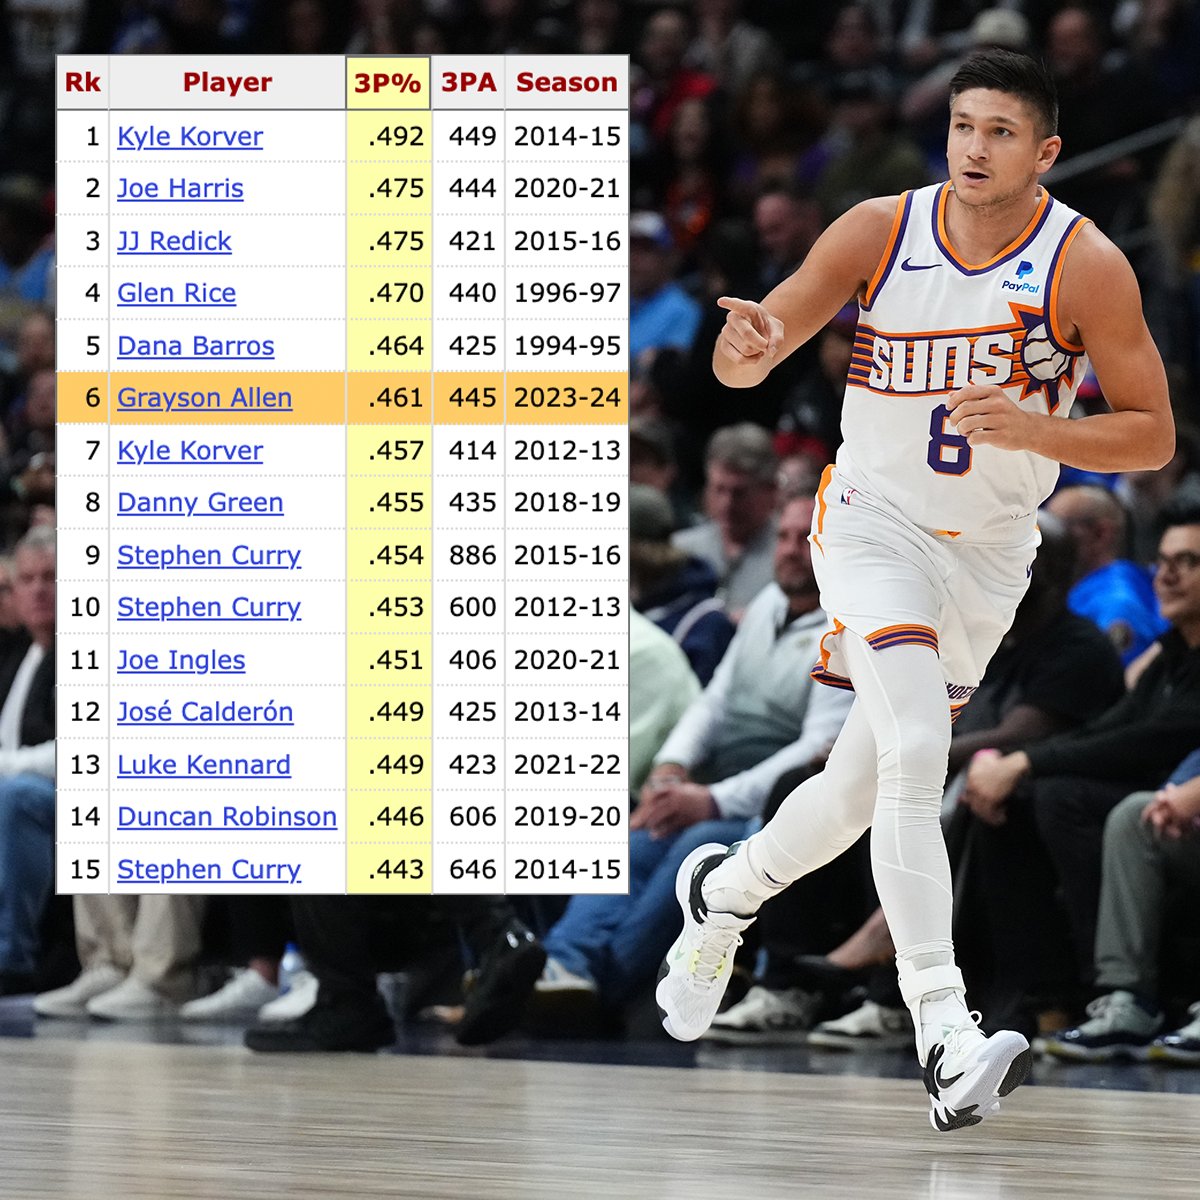 Grayson Allen shot 46.1% from three on nearly 6 attempts per game this season. It's the 6th highest 3-point percentage ever by a player with at least 400 attempts in a season. #NBA | #Suns